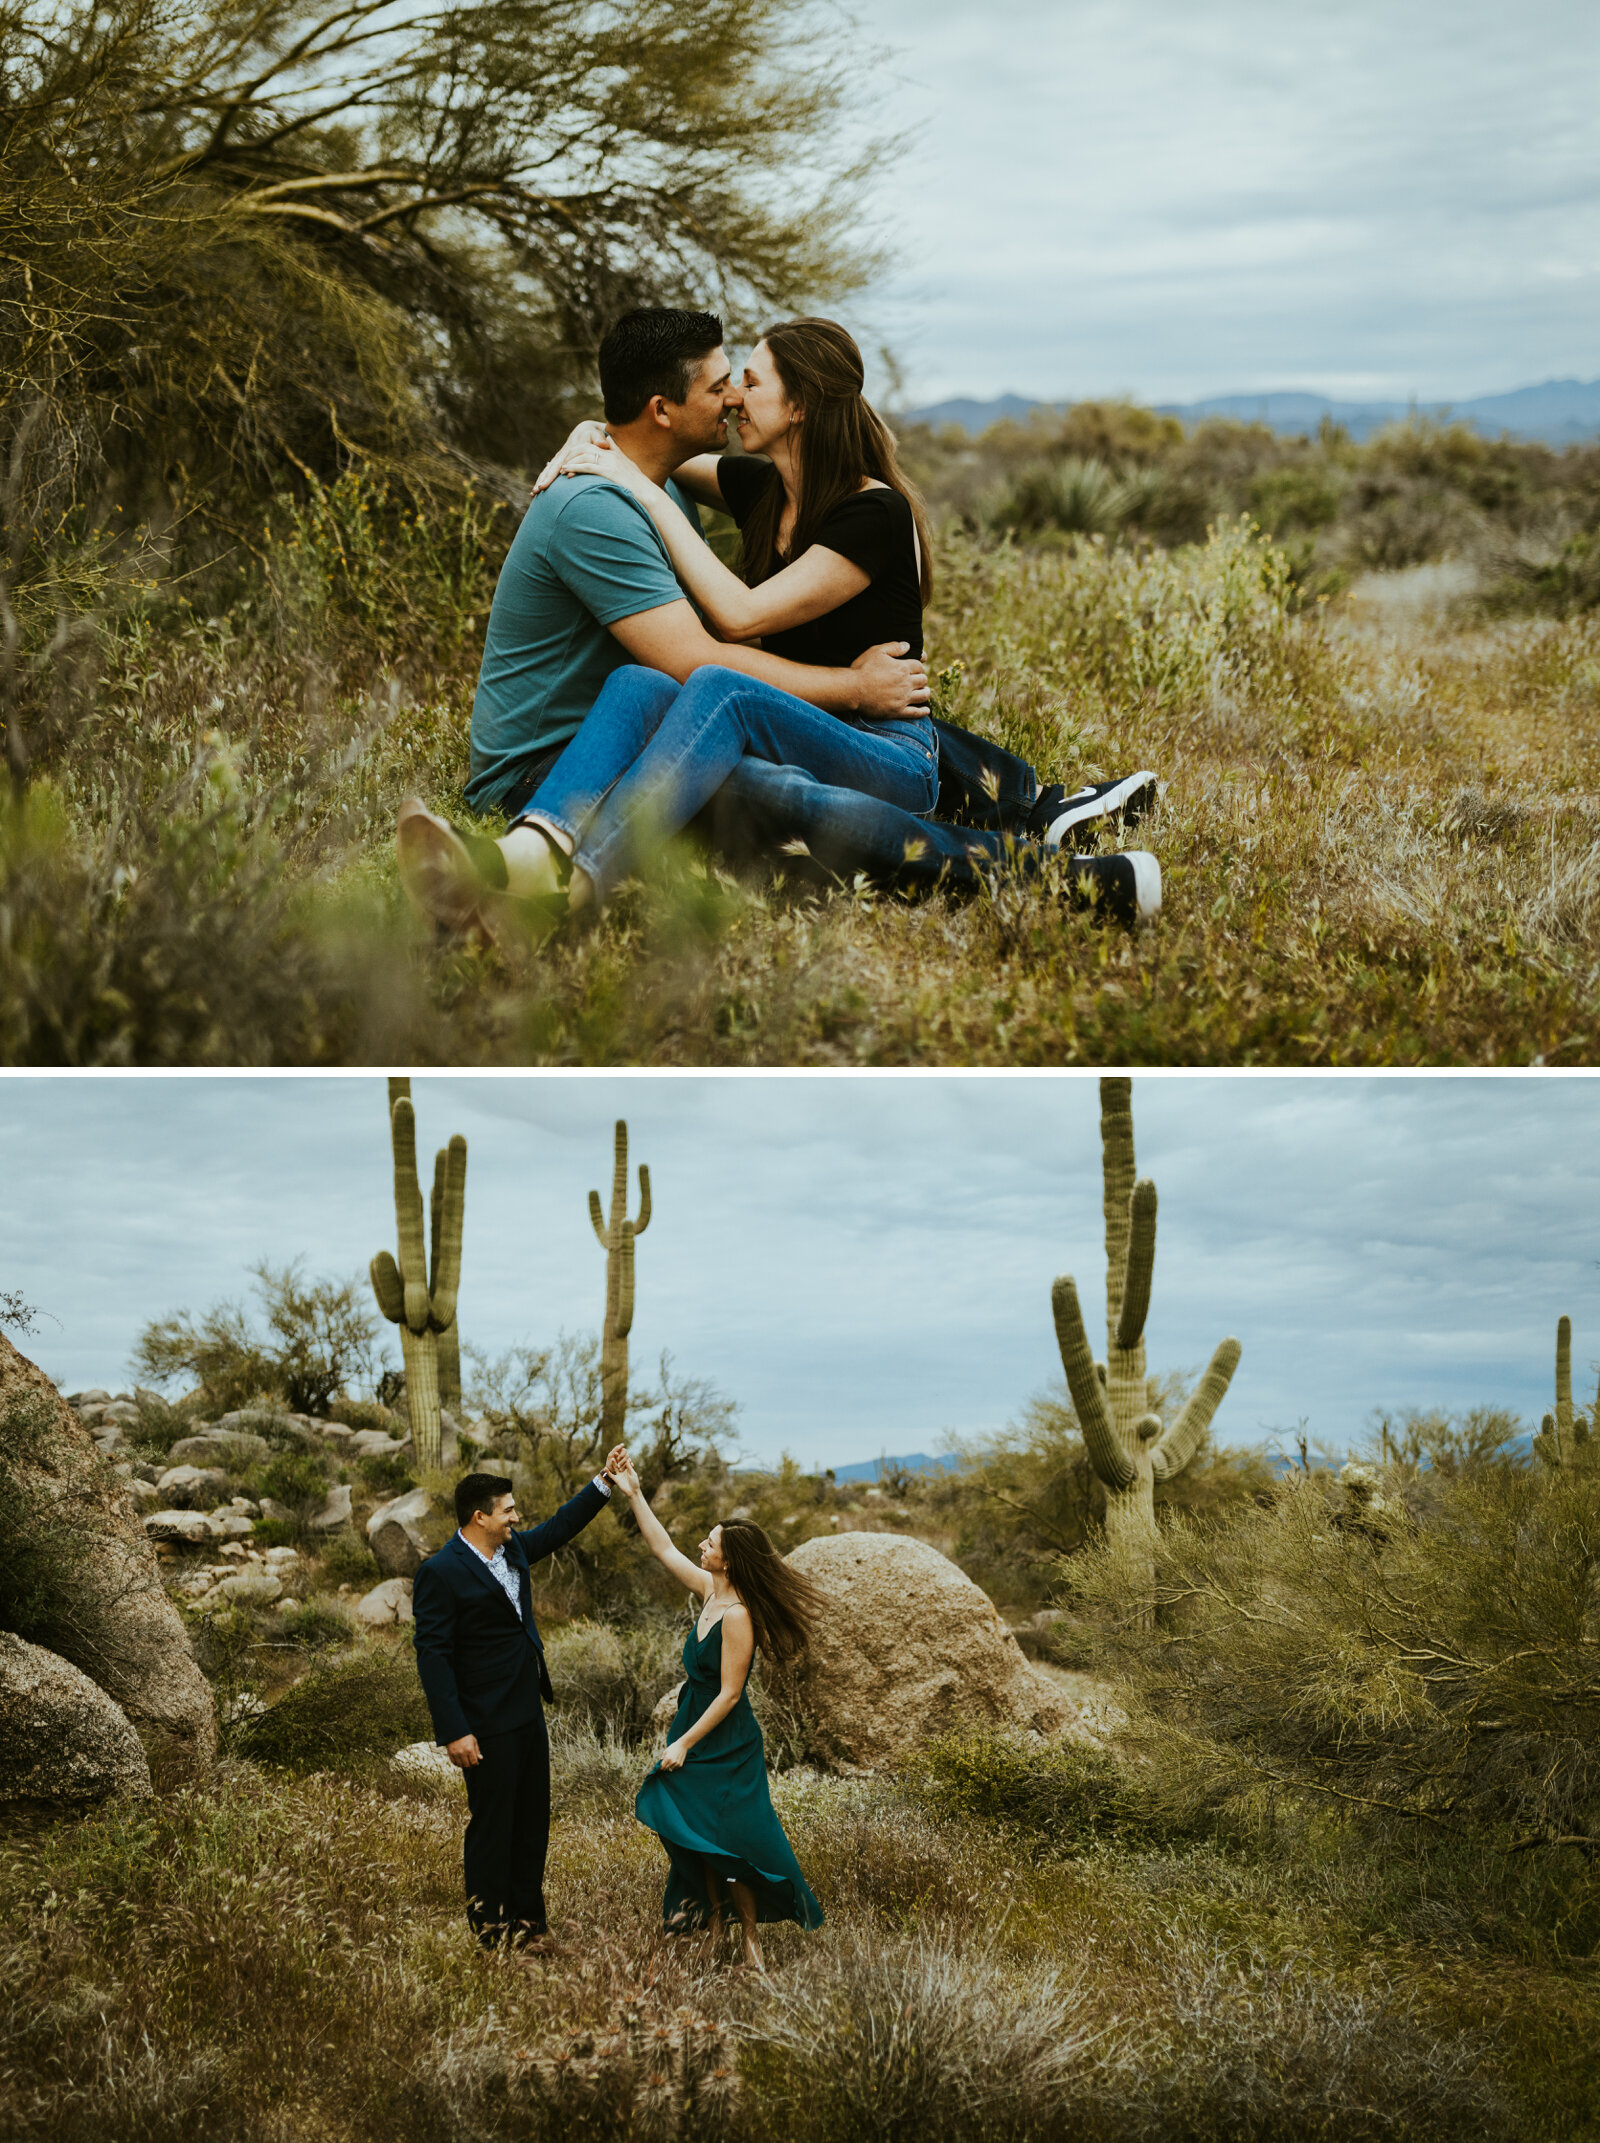 granite mountain trailhead scottsdale arizona engagement outfit inspiration couples outfit ideas for an engagement session.jpg